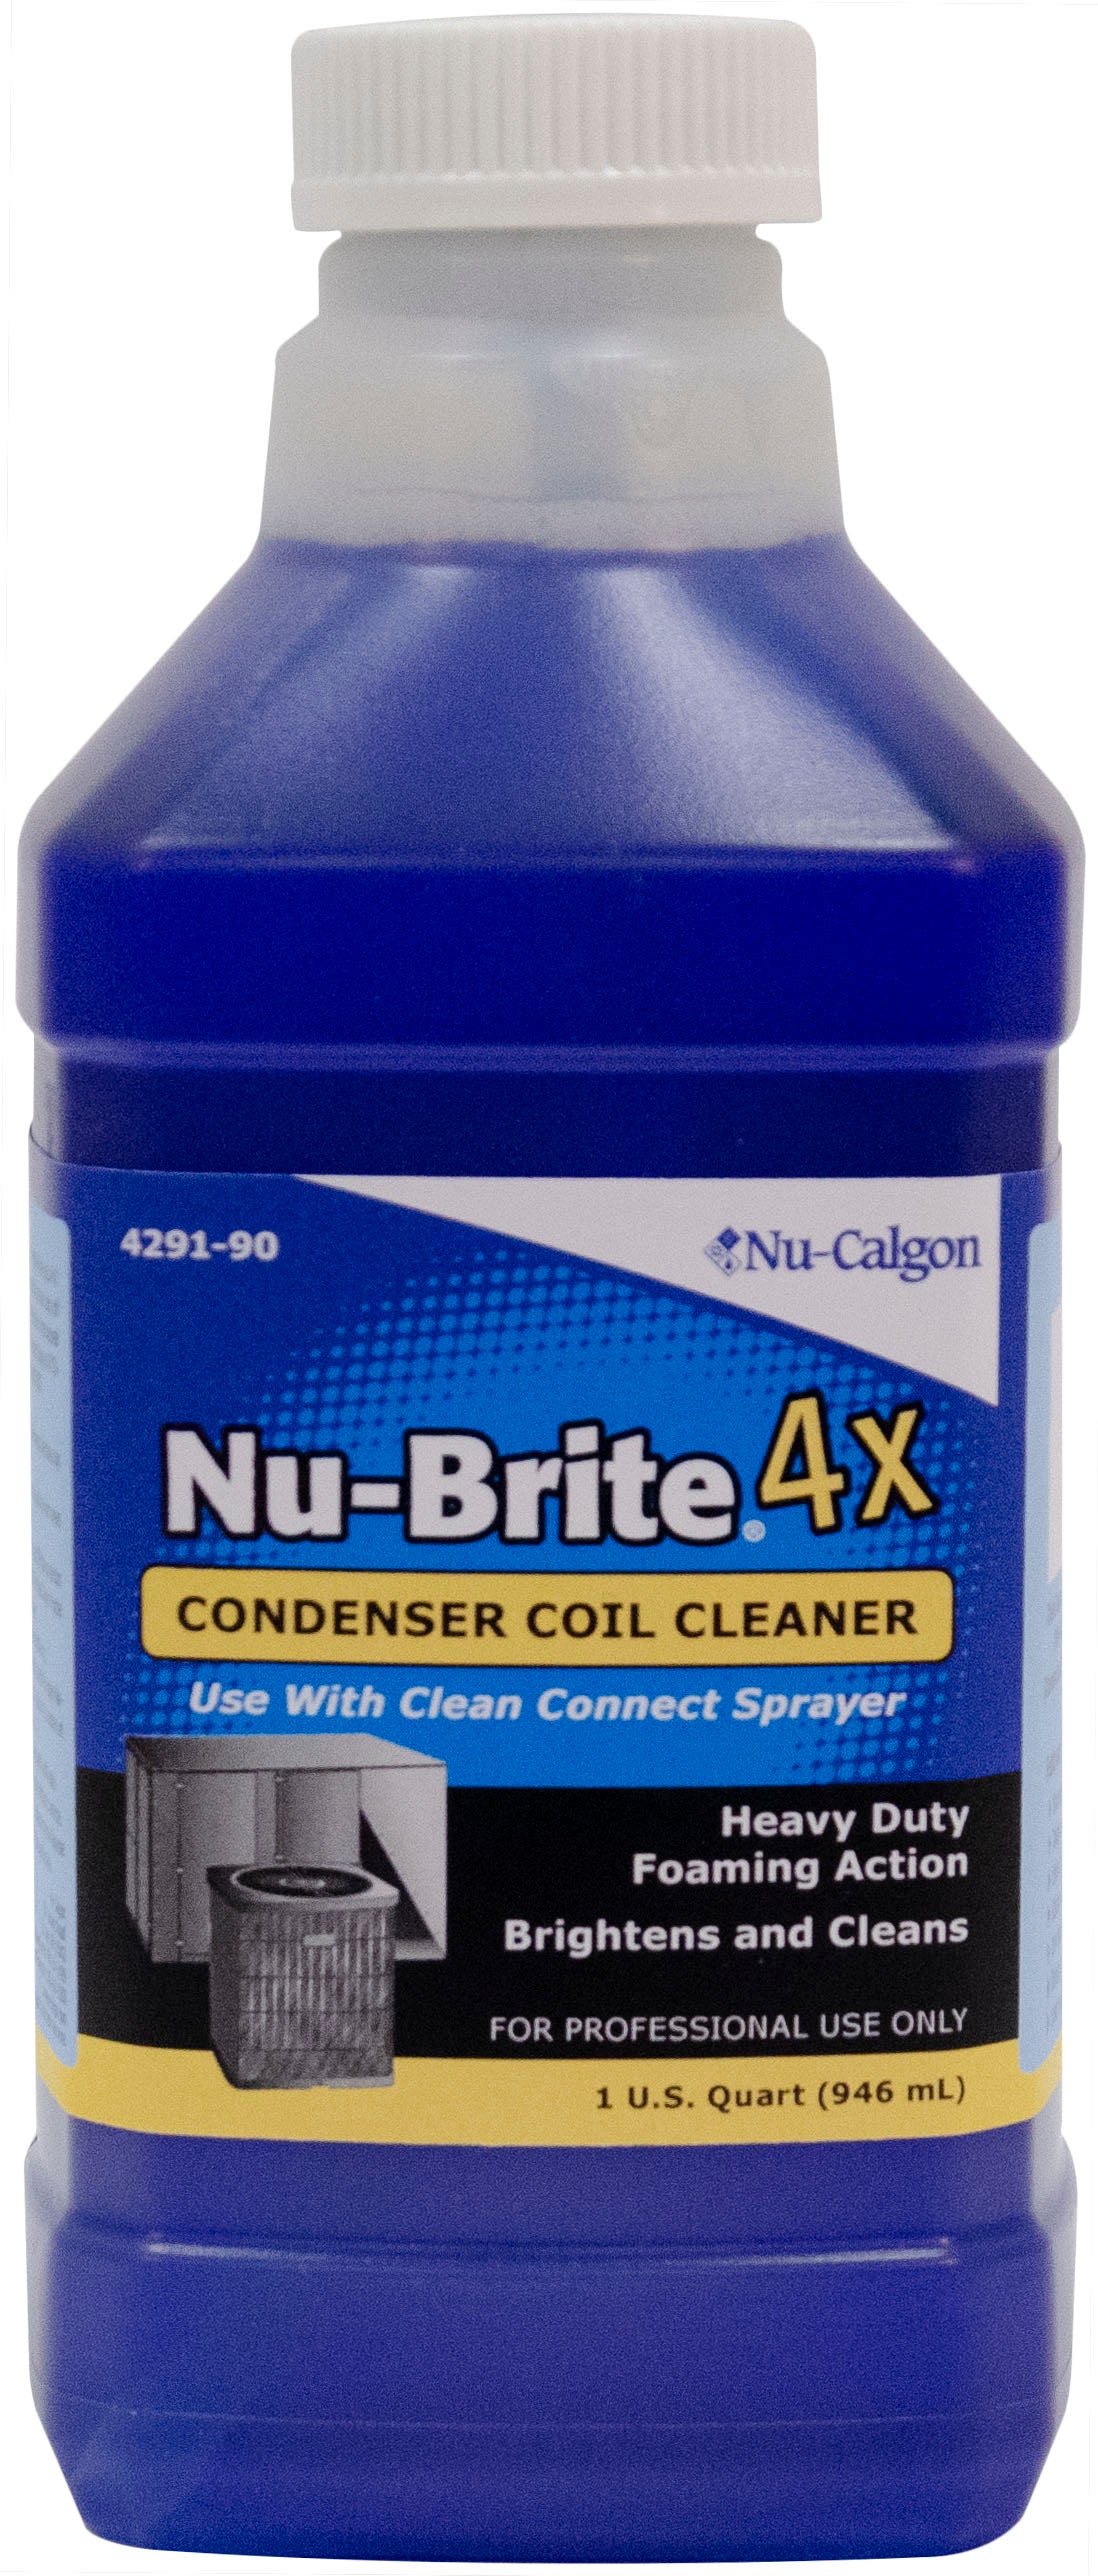 Coil Cleaner 4 Gallons (4 x 1 Gallon)